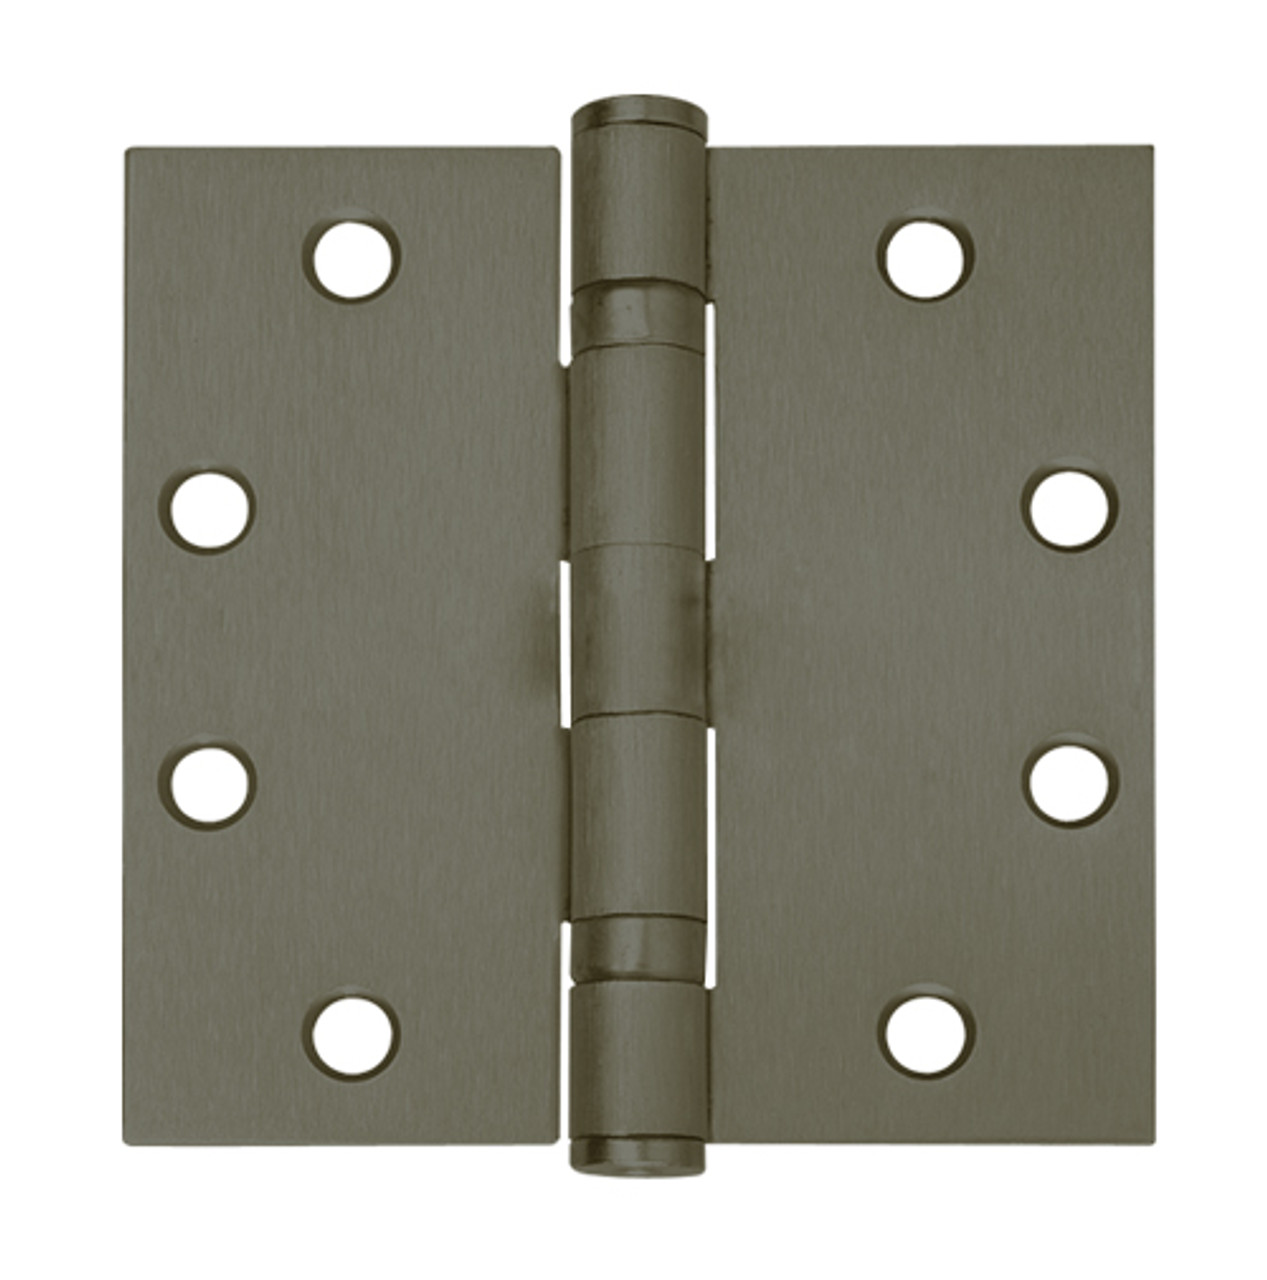 5BB1-4-5x4-5-640-TW8 IVES 5 Knuckle Ball Bearing Full Mortise Hinge with Electric Thru-Wire in Dark Bronze